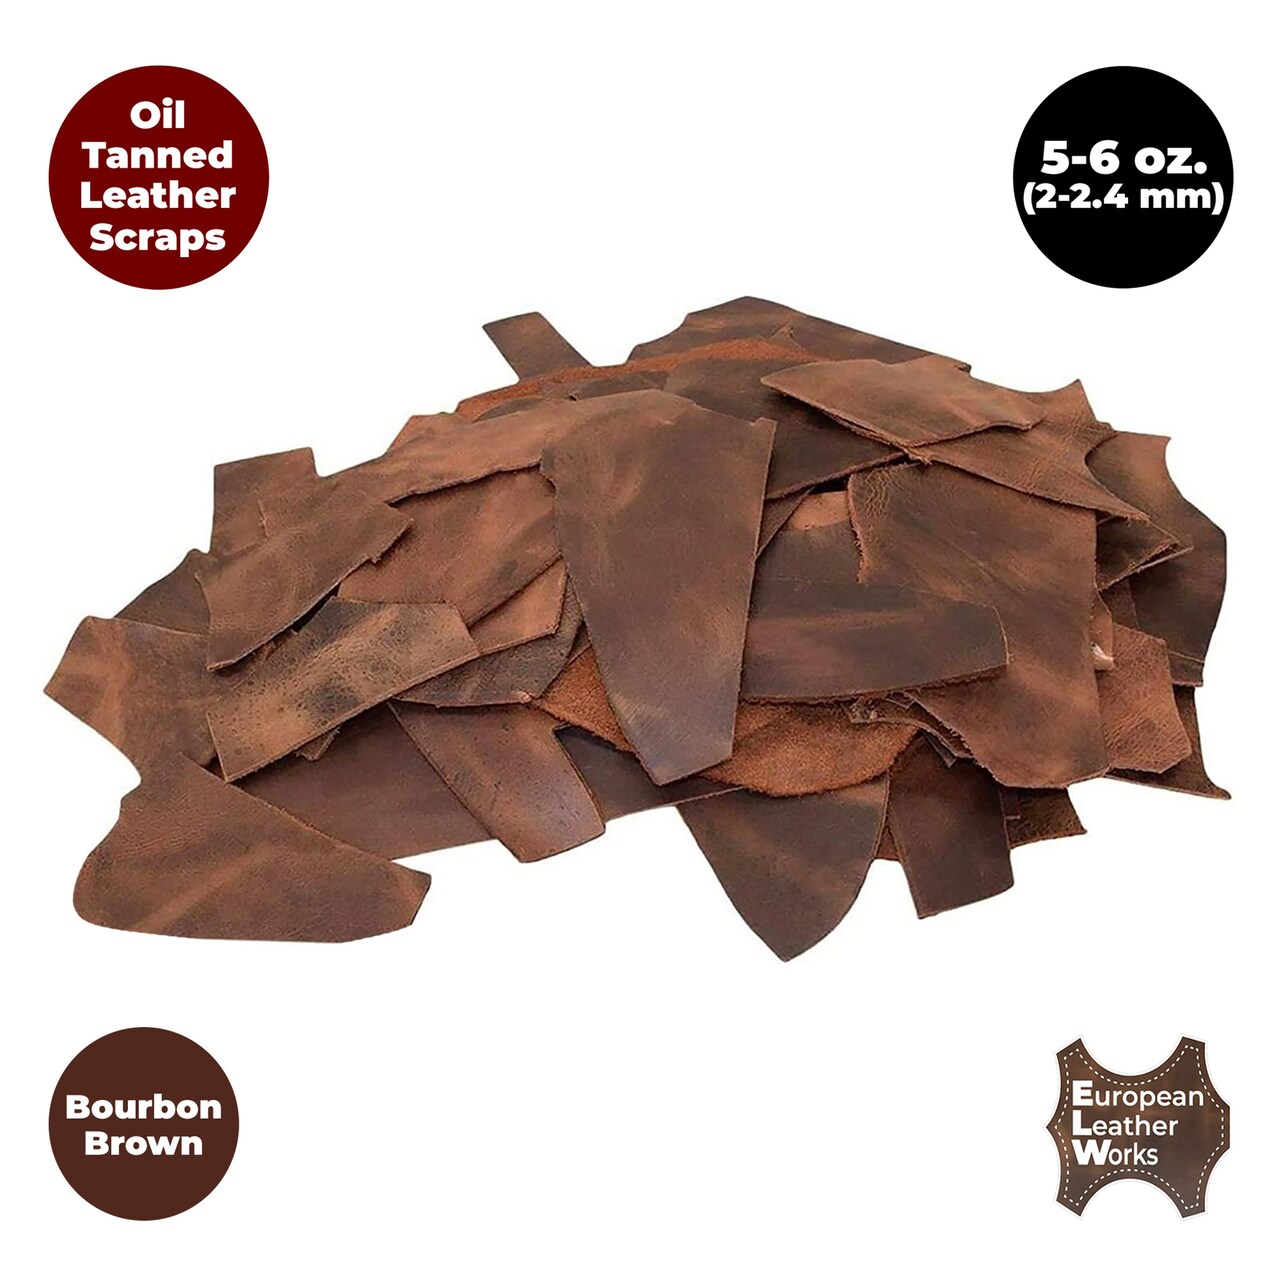 ELW 2-20 LB USA Cowhide Full Grain Scraps Bourbon Brown Leather 5-6 oz (2-2.4mm) Thickness Calf Hide Full Grain Oil Finished Leather Tooling, Holsters, Knife Sheath, Carving, Embossing, Stamping